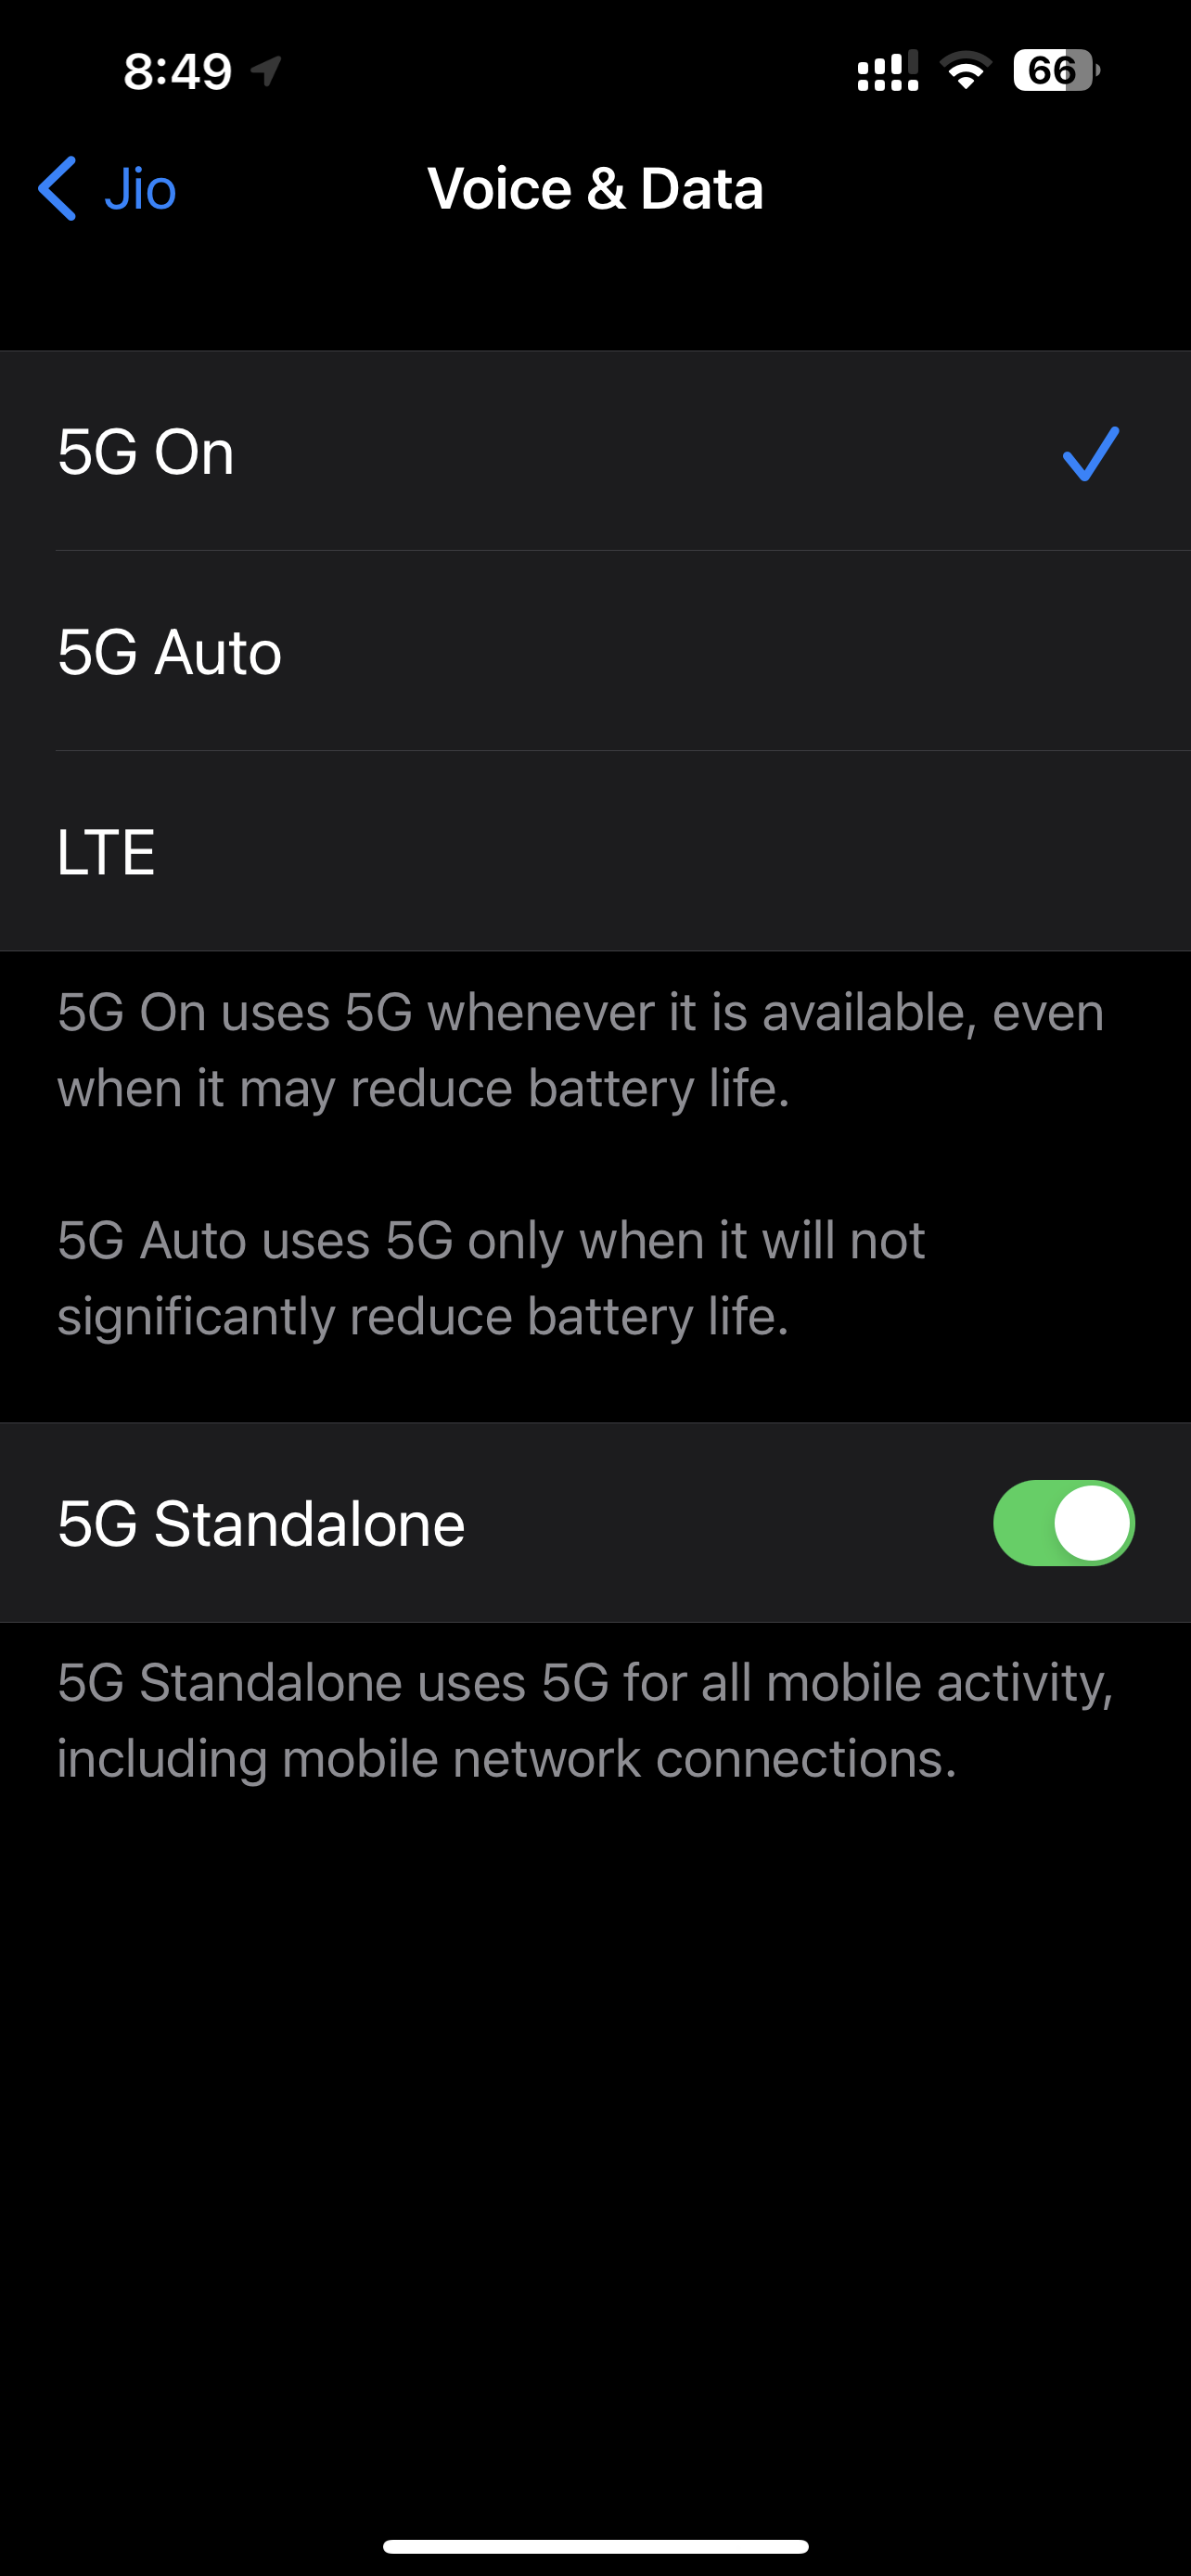 Anyone else missing 5G NR Connection Status in iPhone Field Test